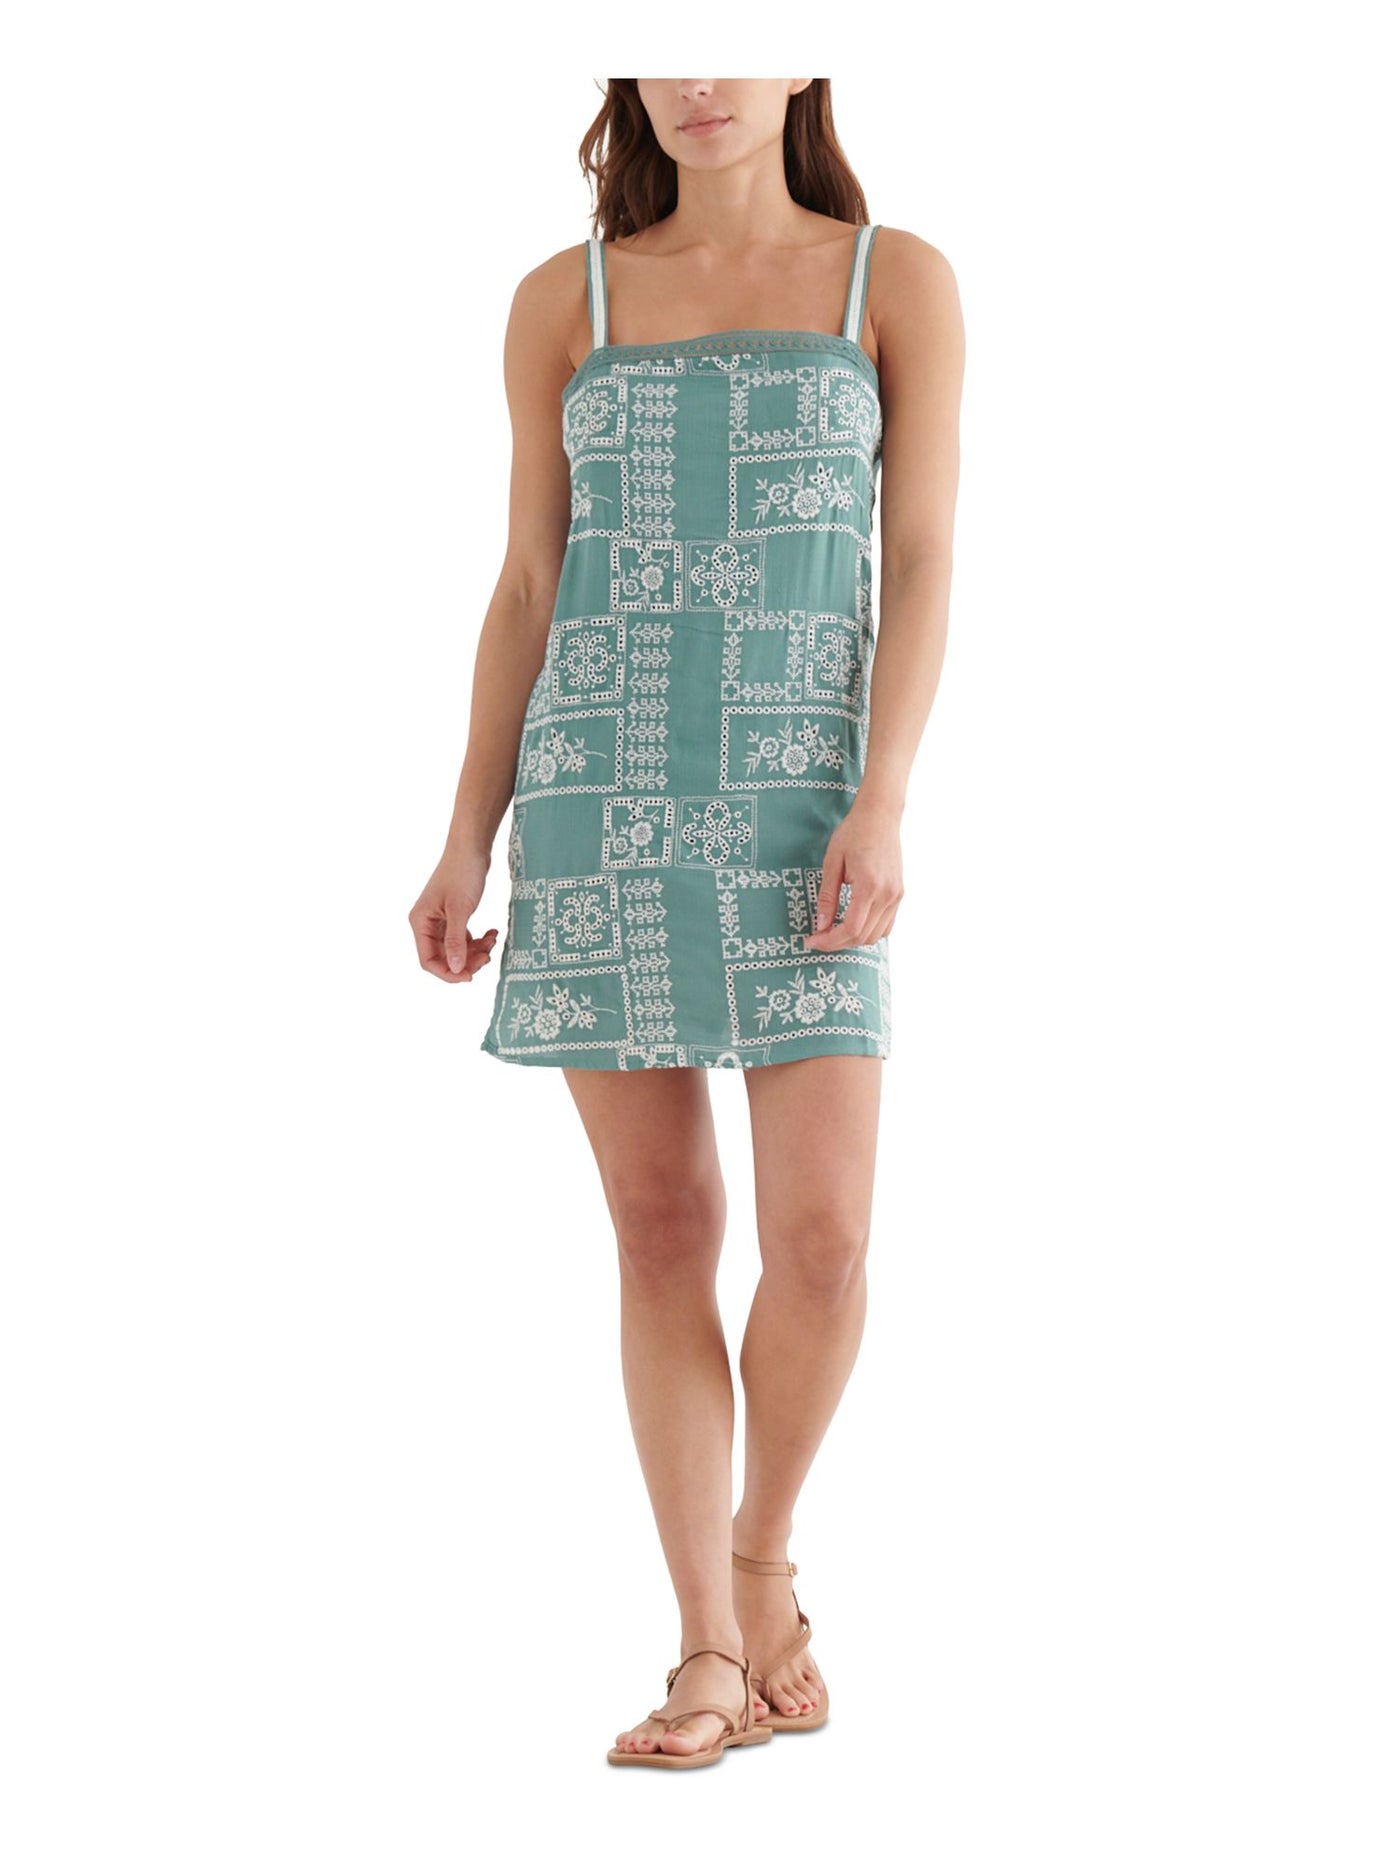 LUCKY BRAND Womens Teal Embroidered Textured Lace Zippered Lined Sleeveless Square Neck Short Shift Dress S